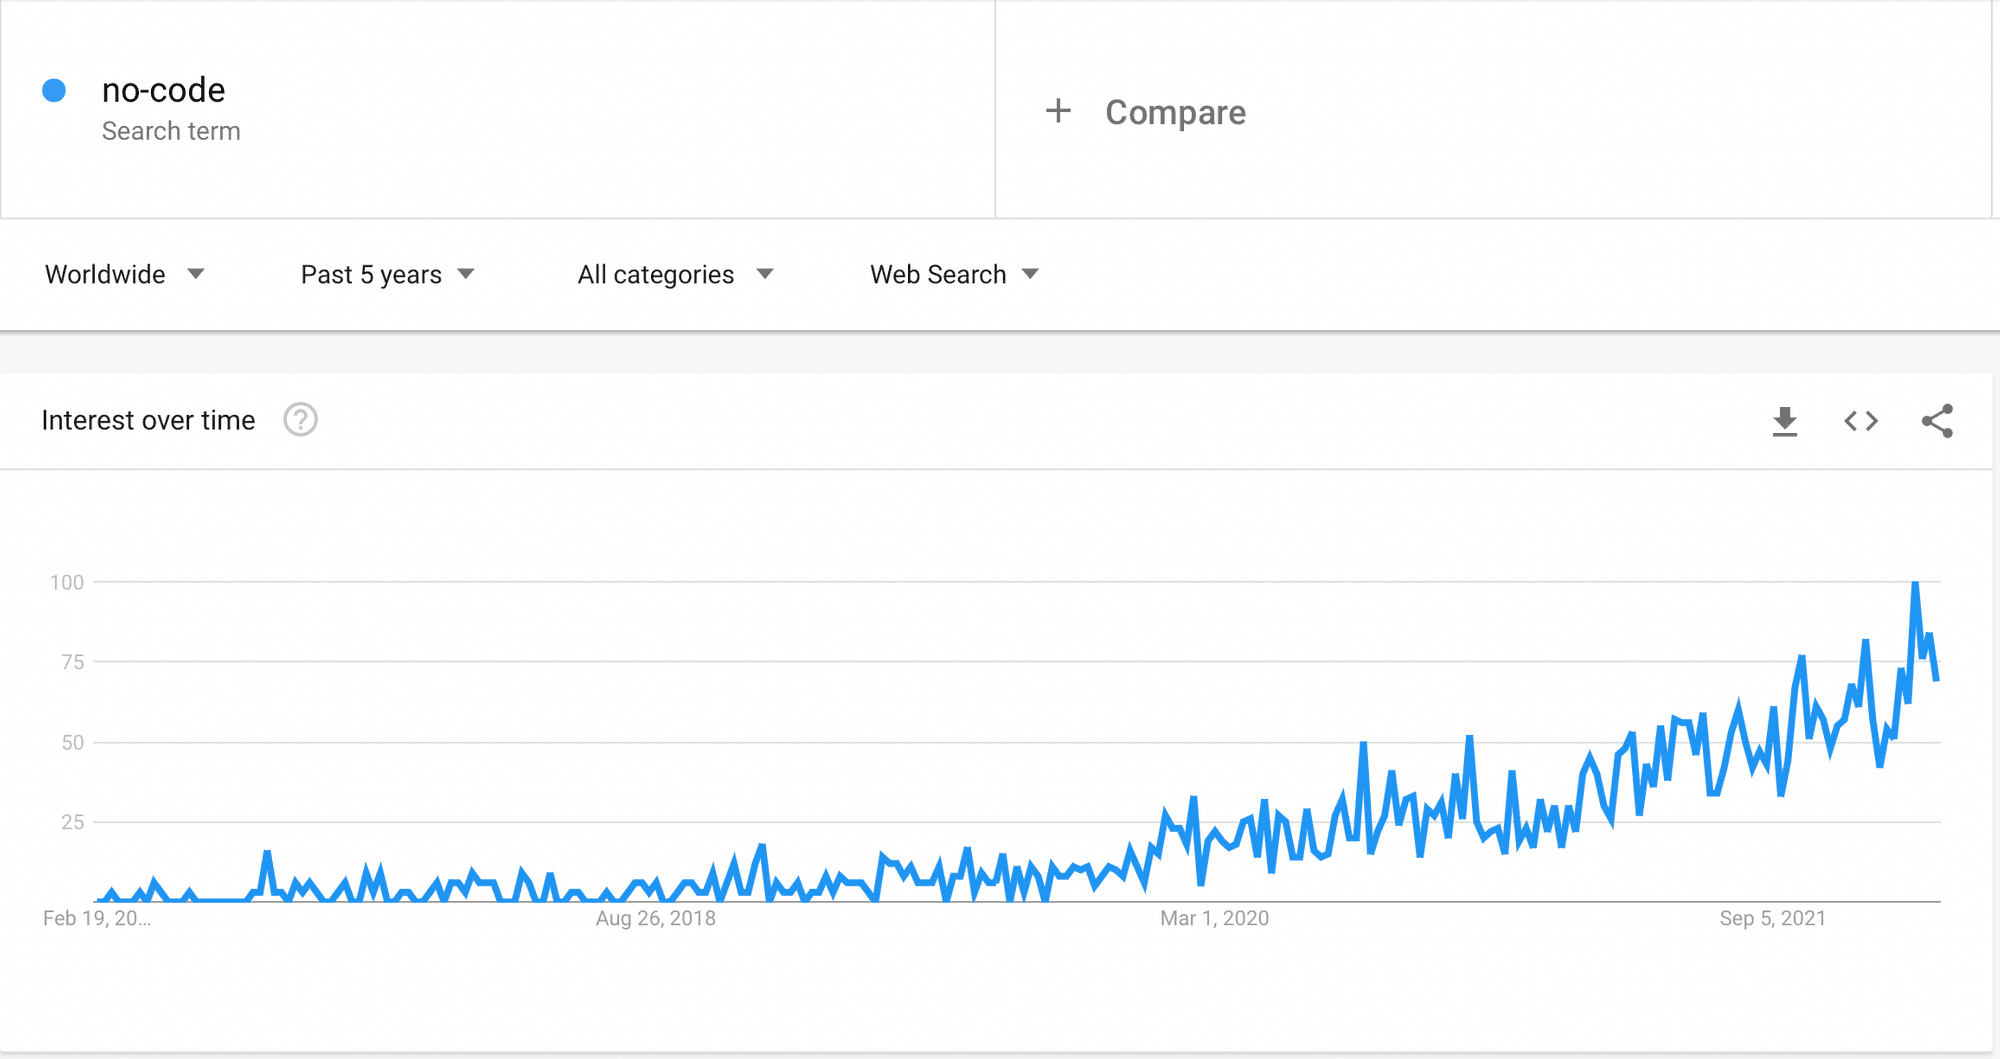 Interest in 'no-code' over the past 5 years graph